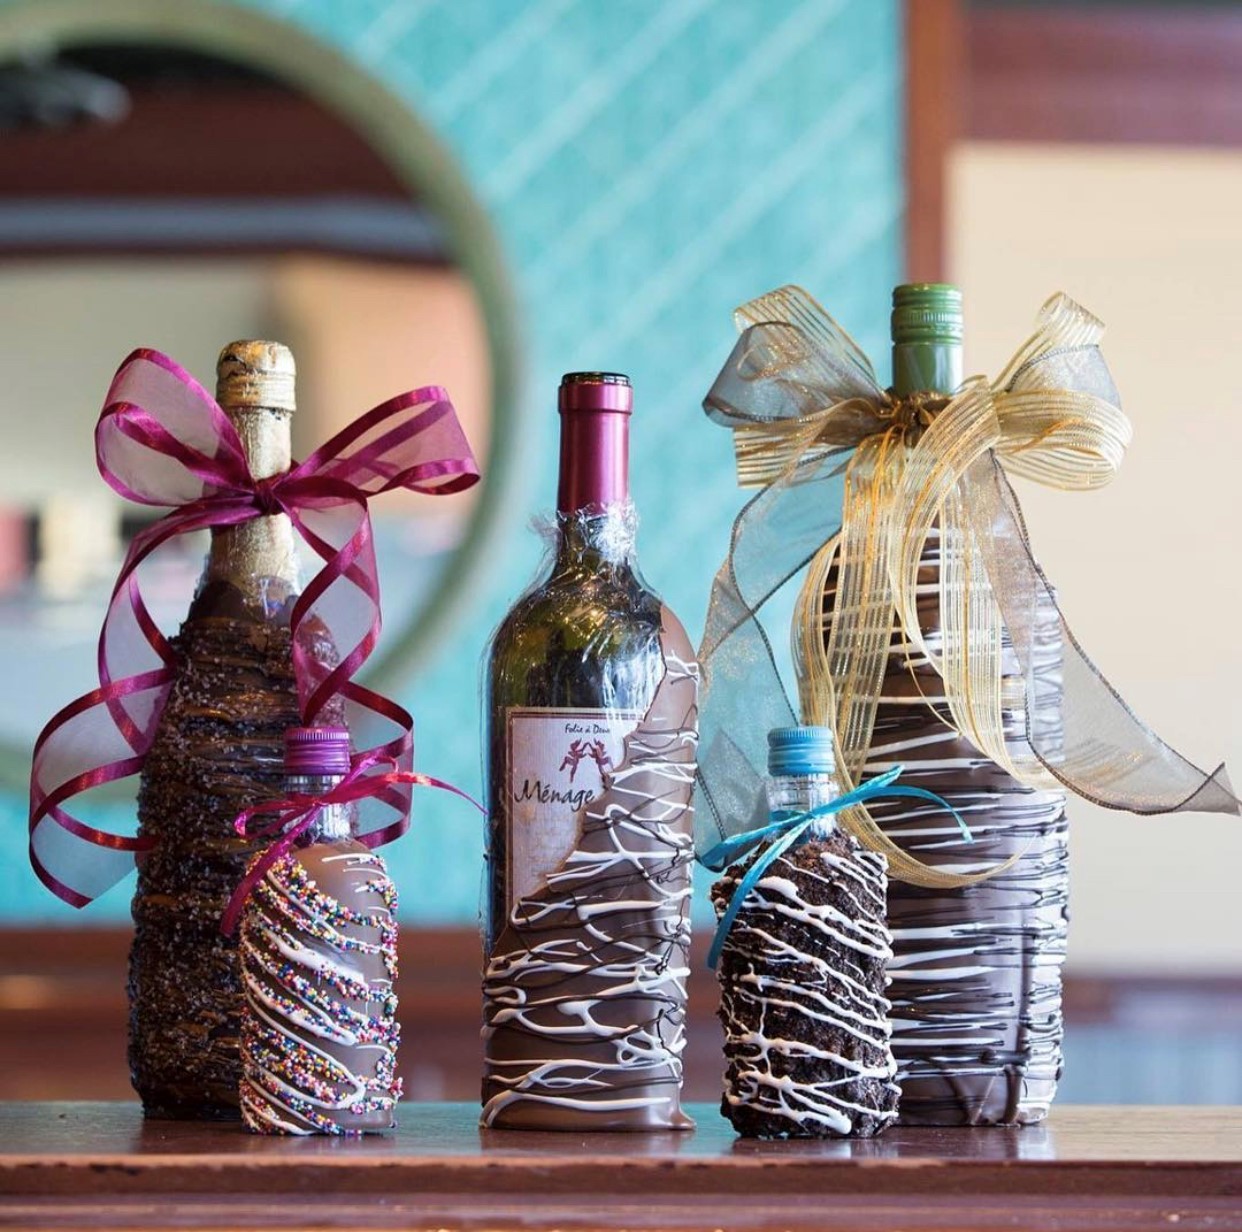 An assortment of chocolate dipped wine bottles.